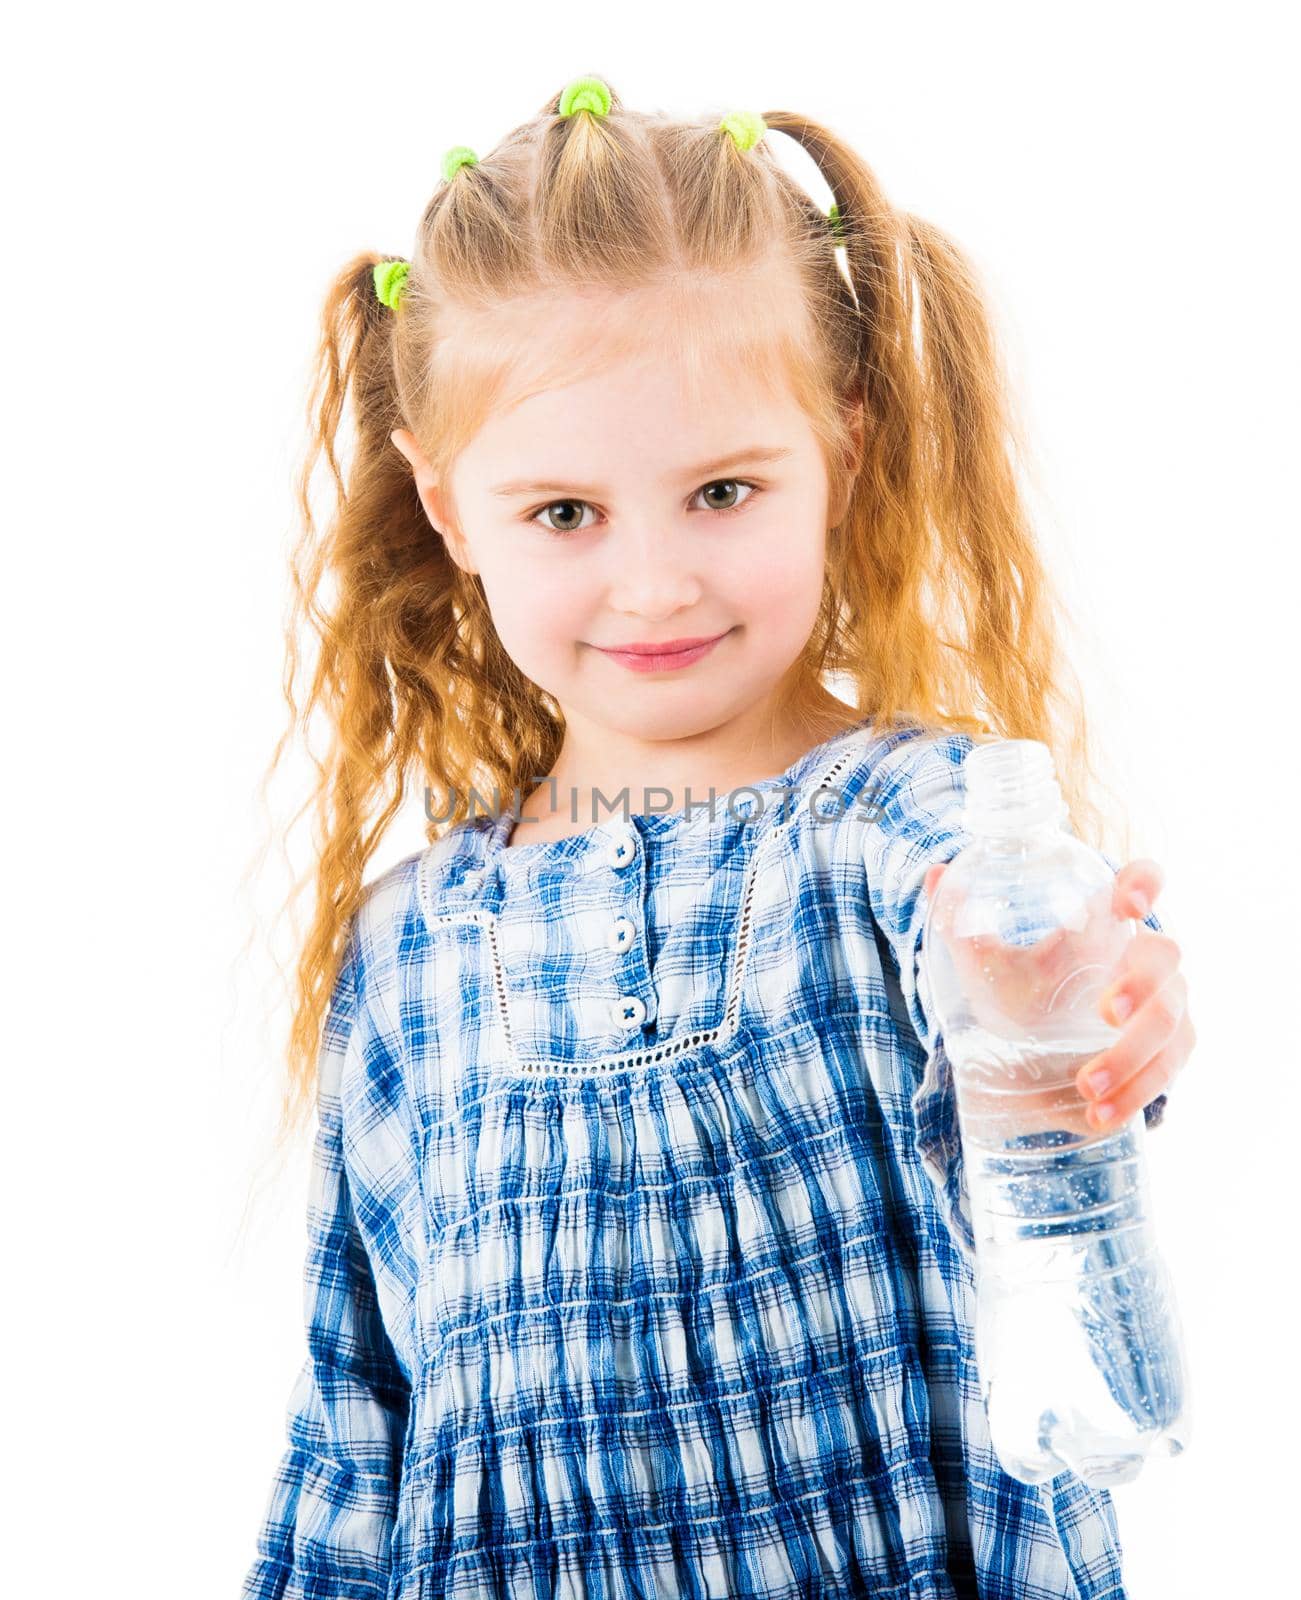 Little child girl holding open bottle of mineral water isolated on white background